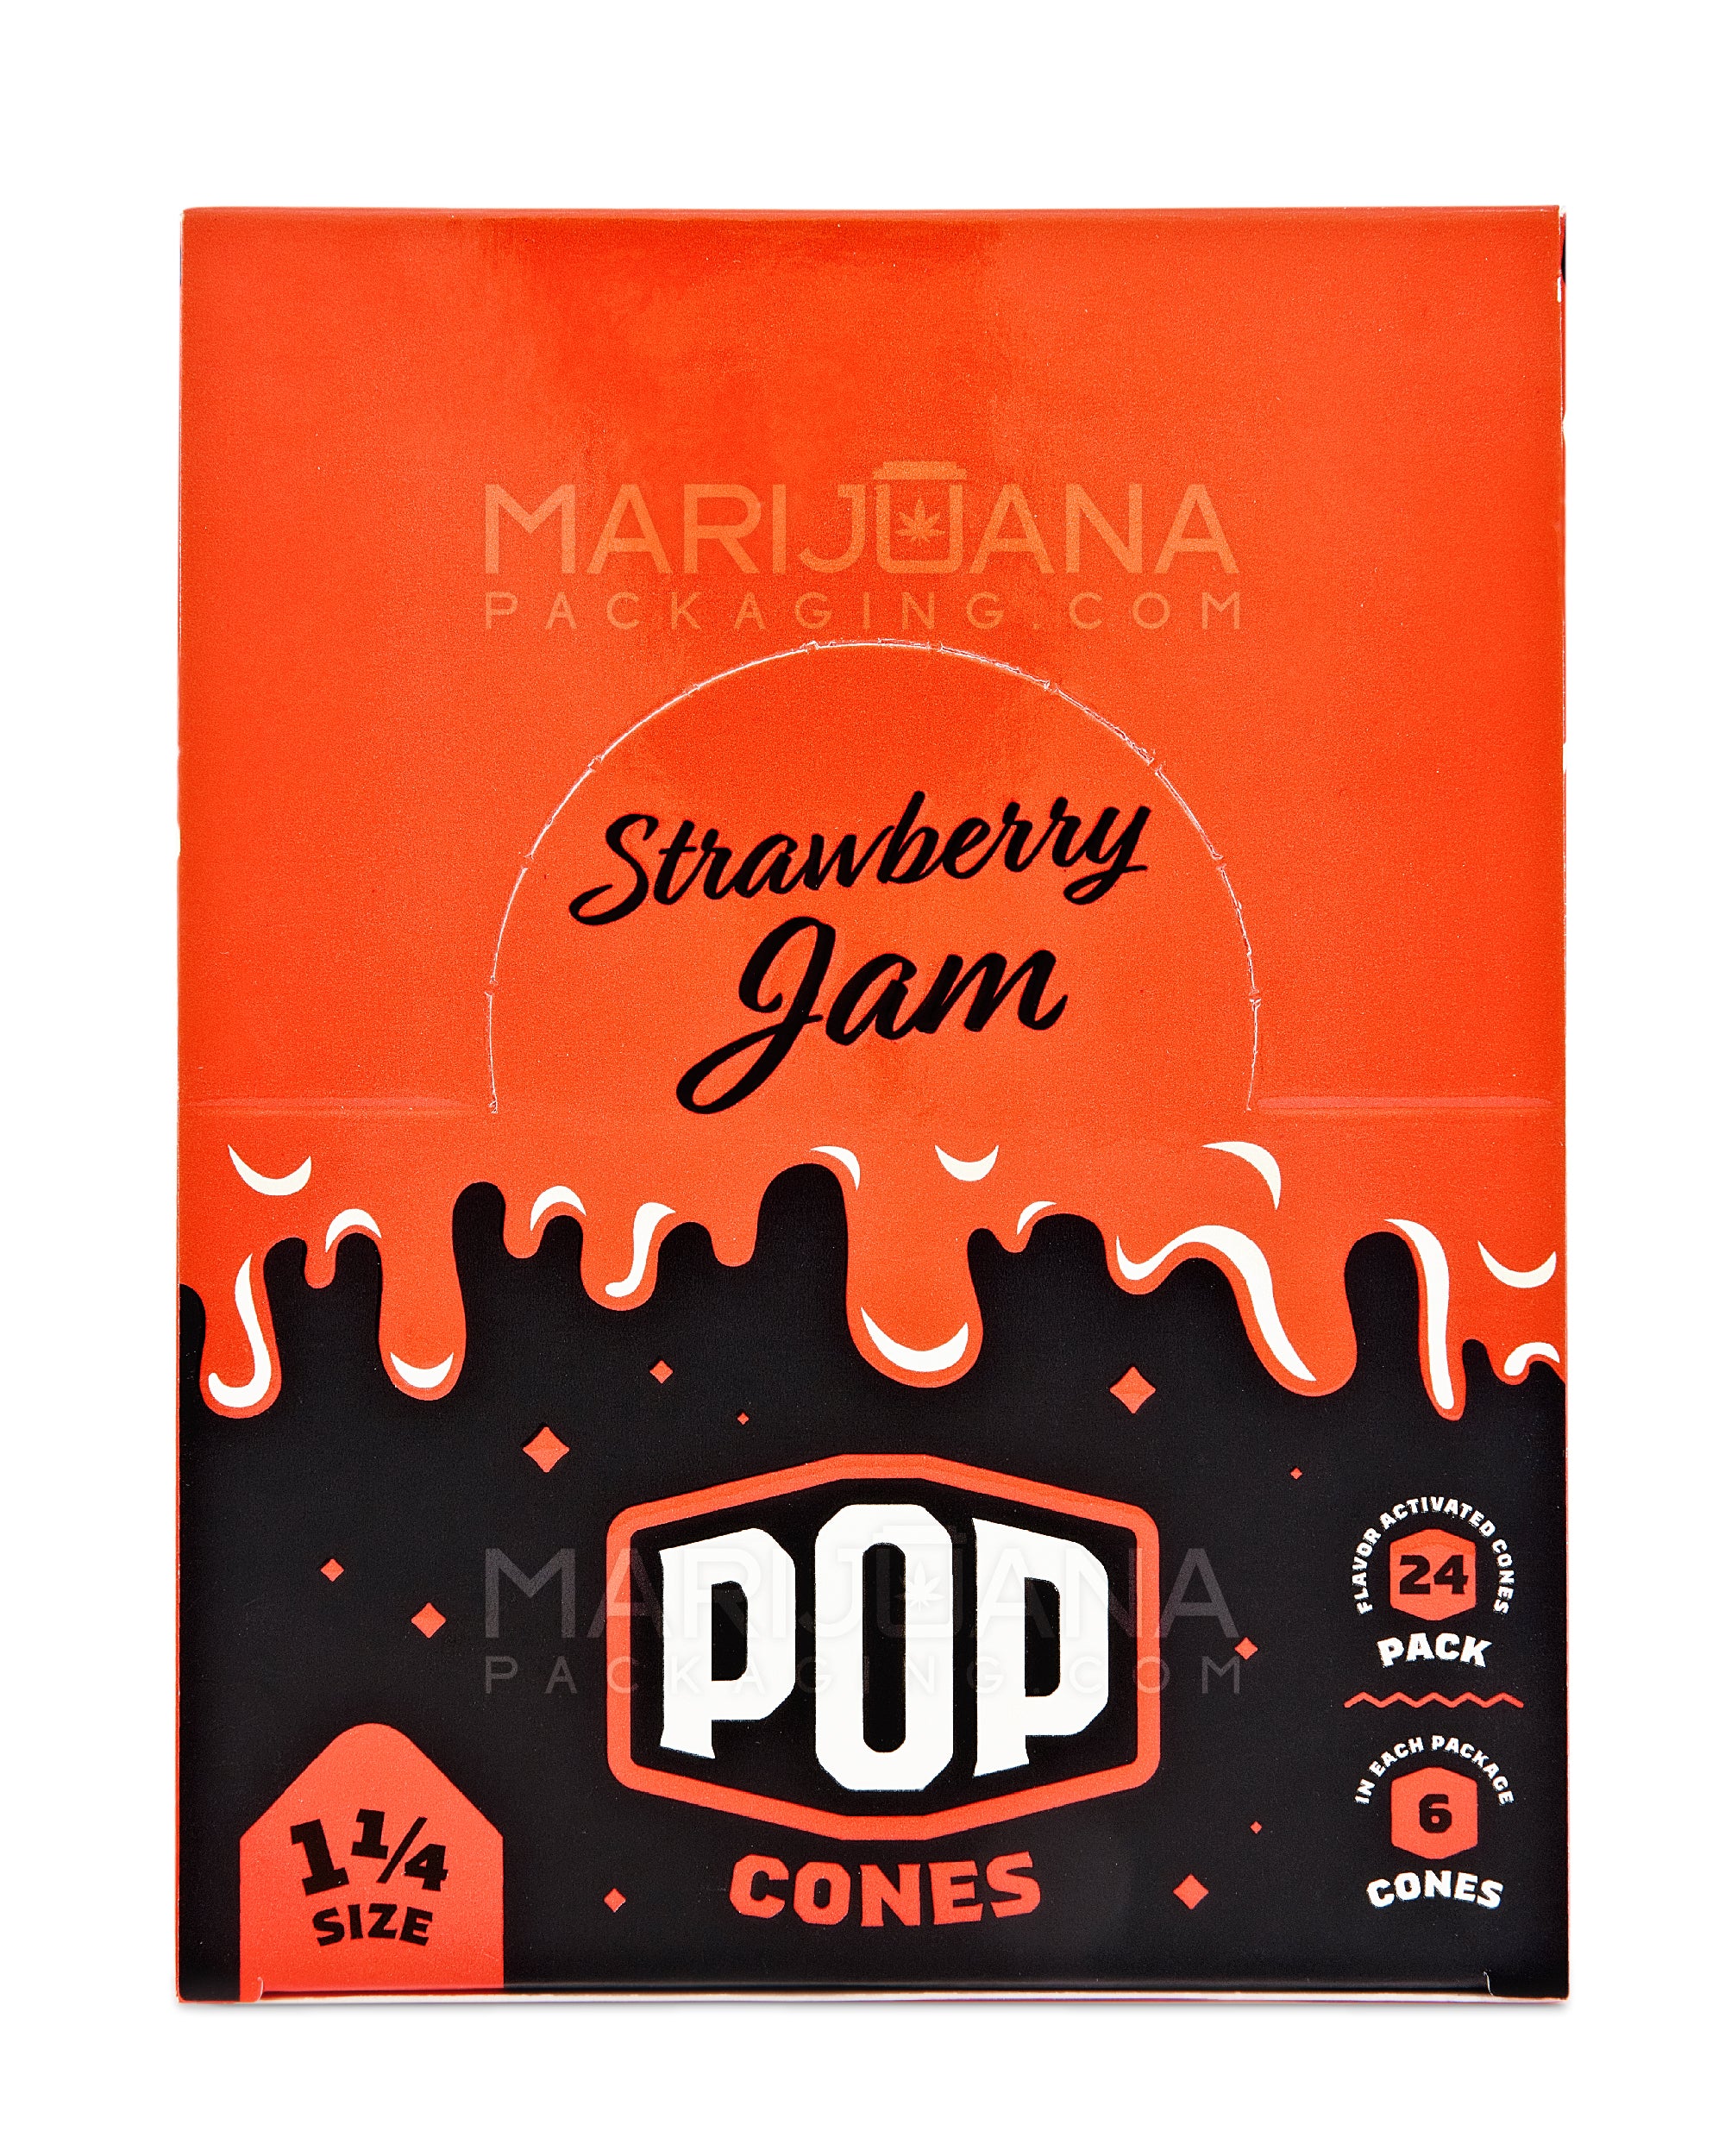 POP CONES | 'Retail Display' 1 1/4 Size Pre-Rolled Cones | 84mm - Strawberry Jam - 24 Count - 7